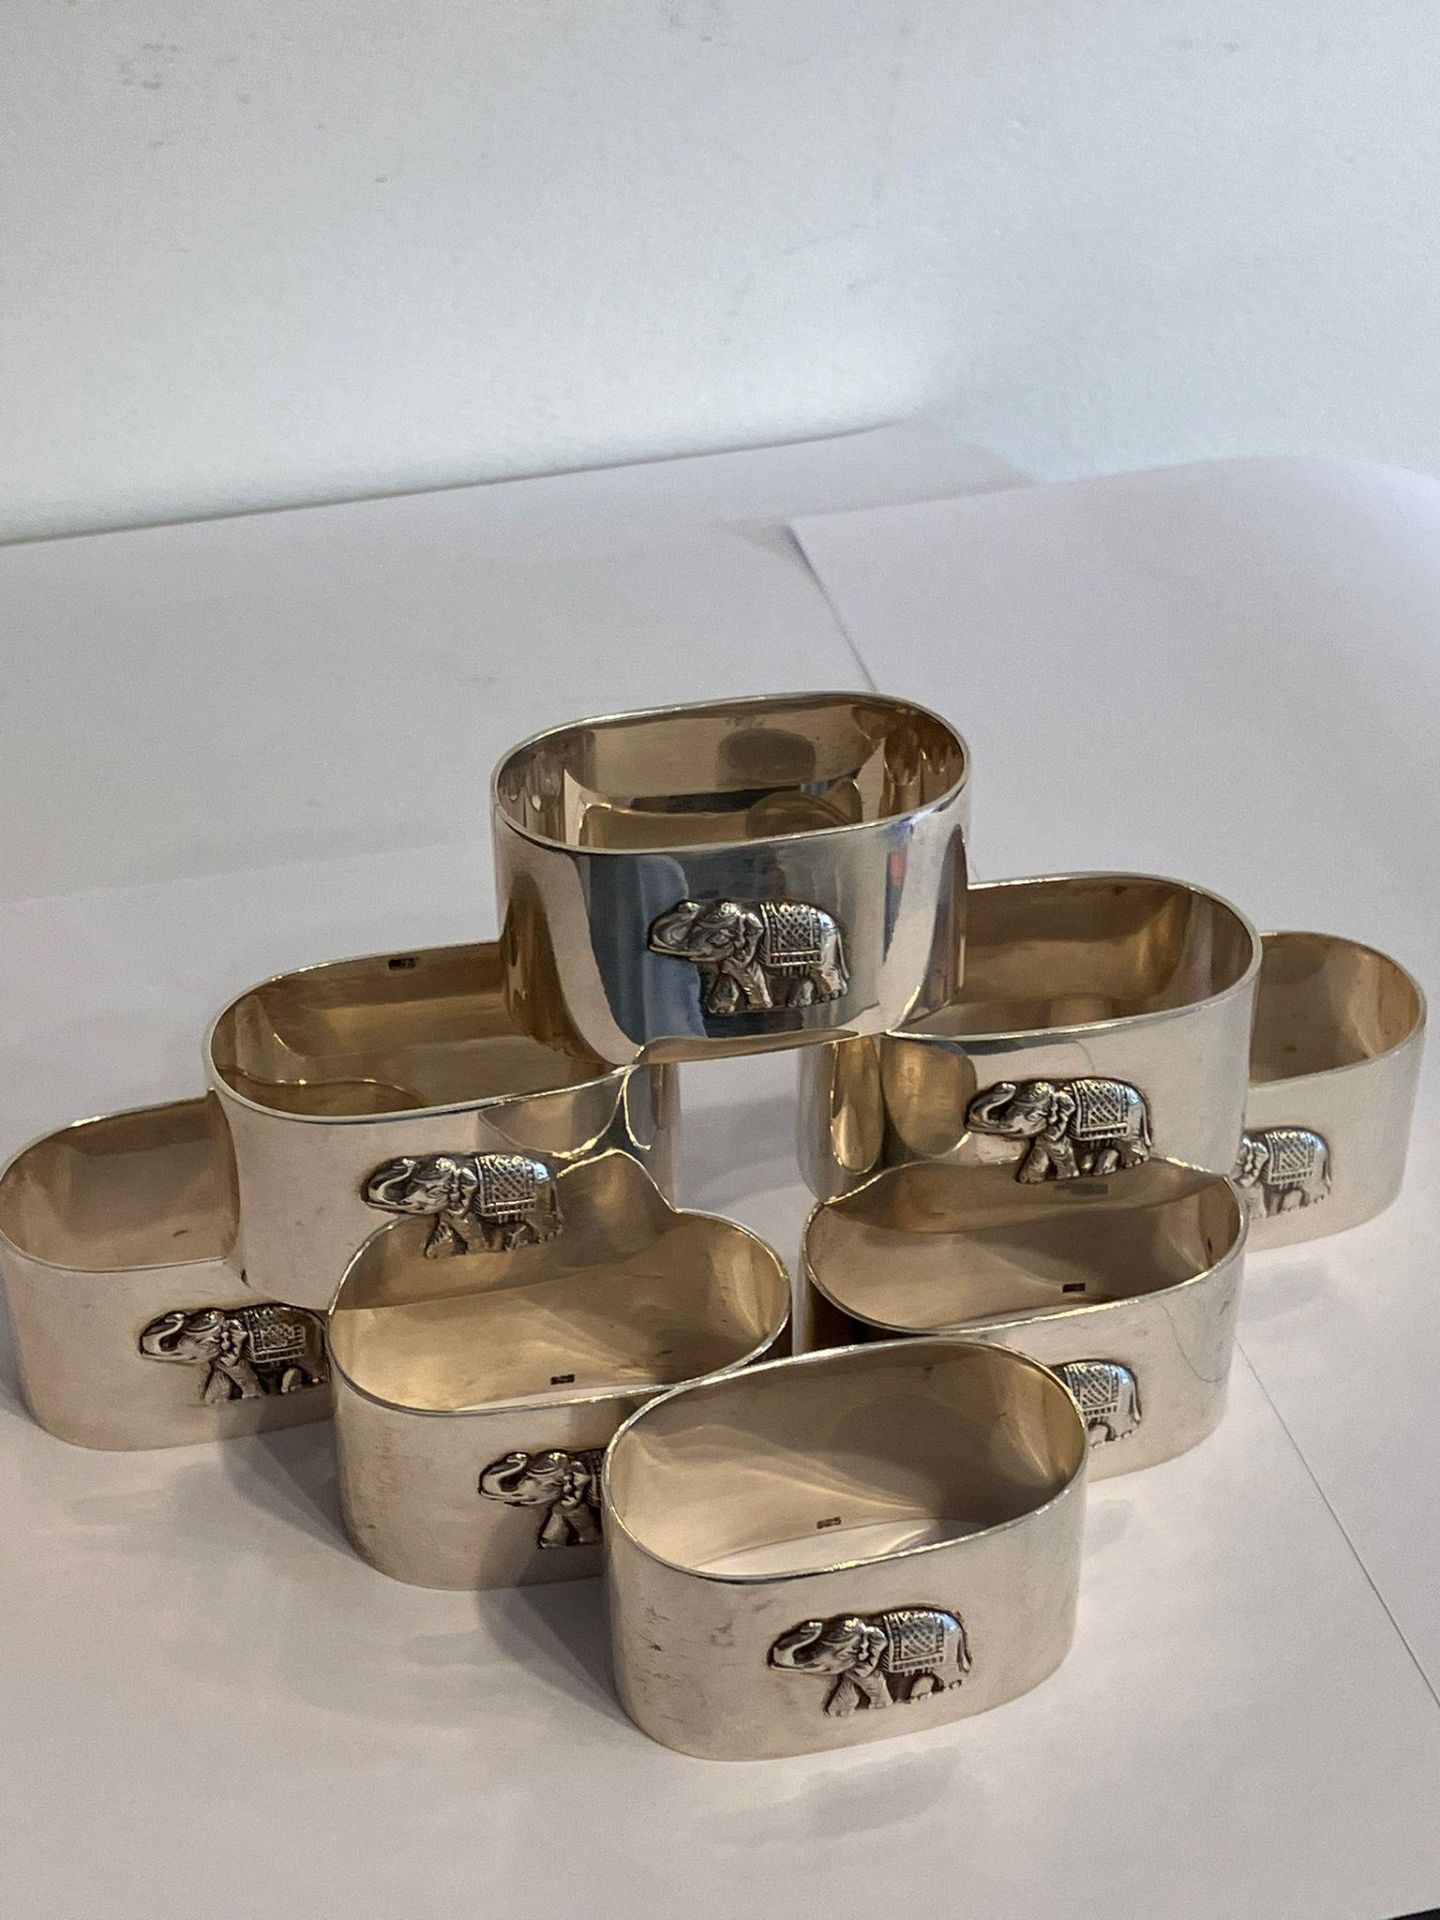 Magnificent set of 8 x SOLID SILVER NAPKIN/ SERVIETTE RINGS. Each piece Embossed with a raised - Image 9 of 9